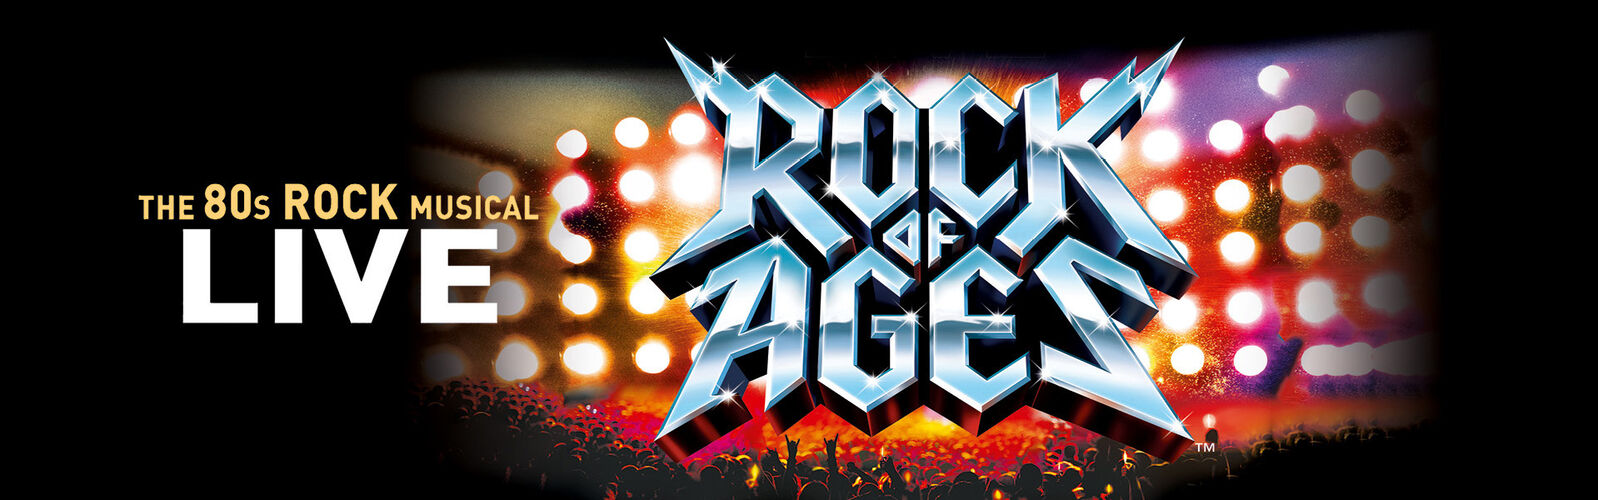 Rock of Ages - The 80s Rock Musical Live 2024 - 5. bis 9. Juni 2024